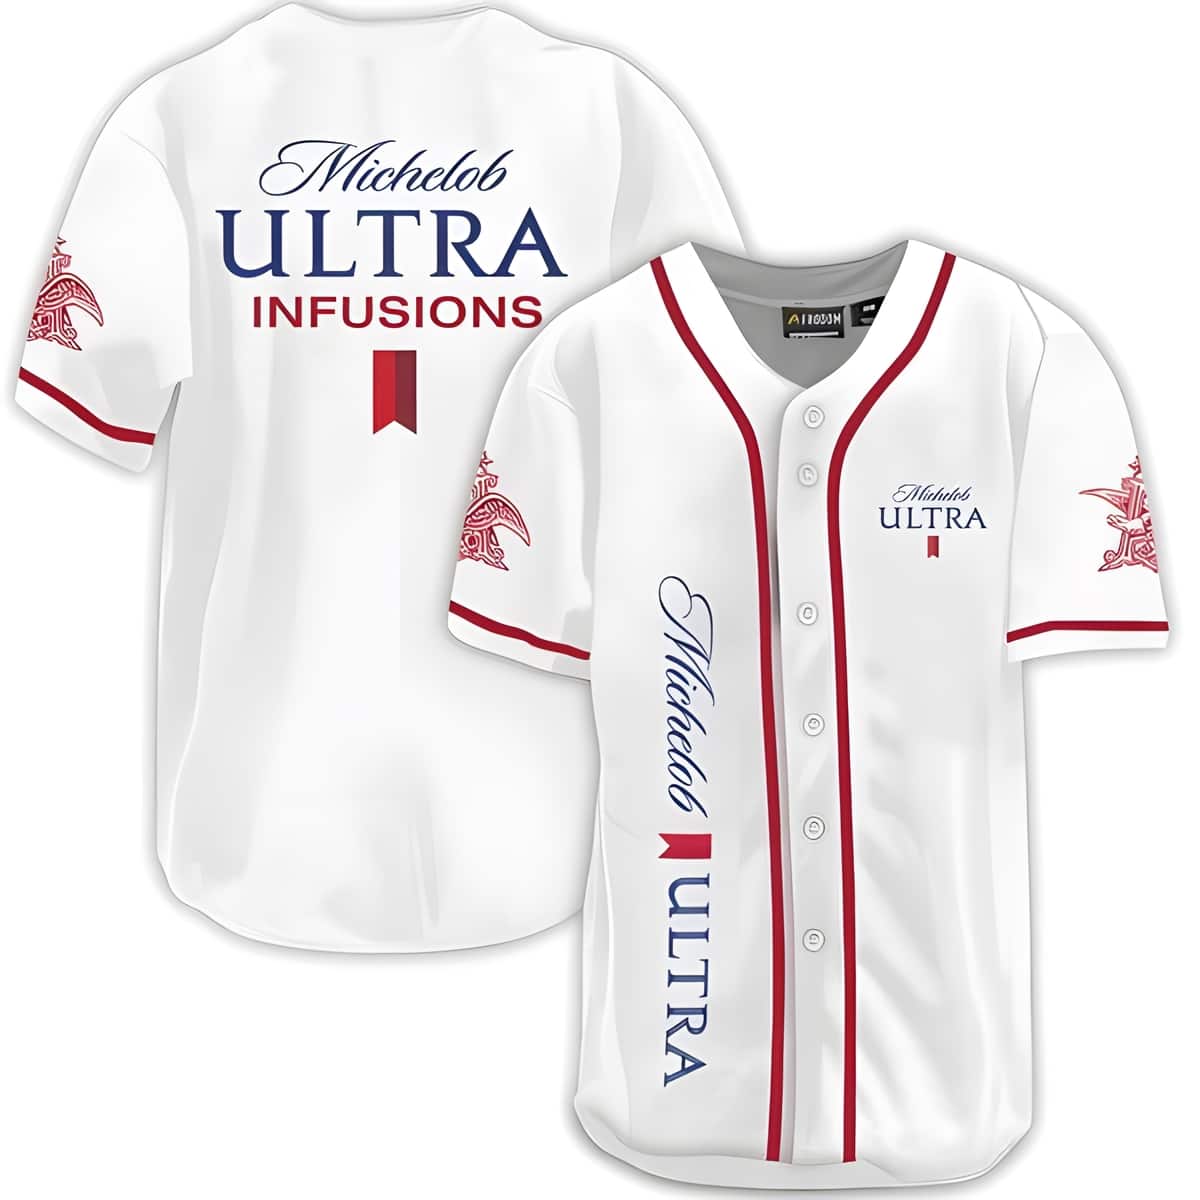 Michelob ULTRA Infusions Baseball Jersey Pomegranate & Agave Light Beer Cool Gift For Baseball Fanclub